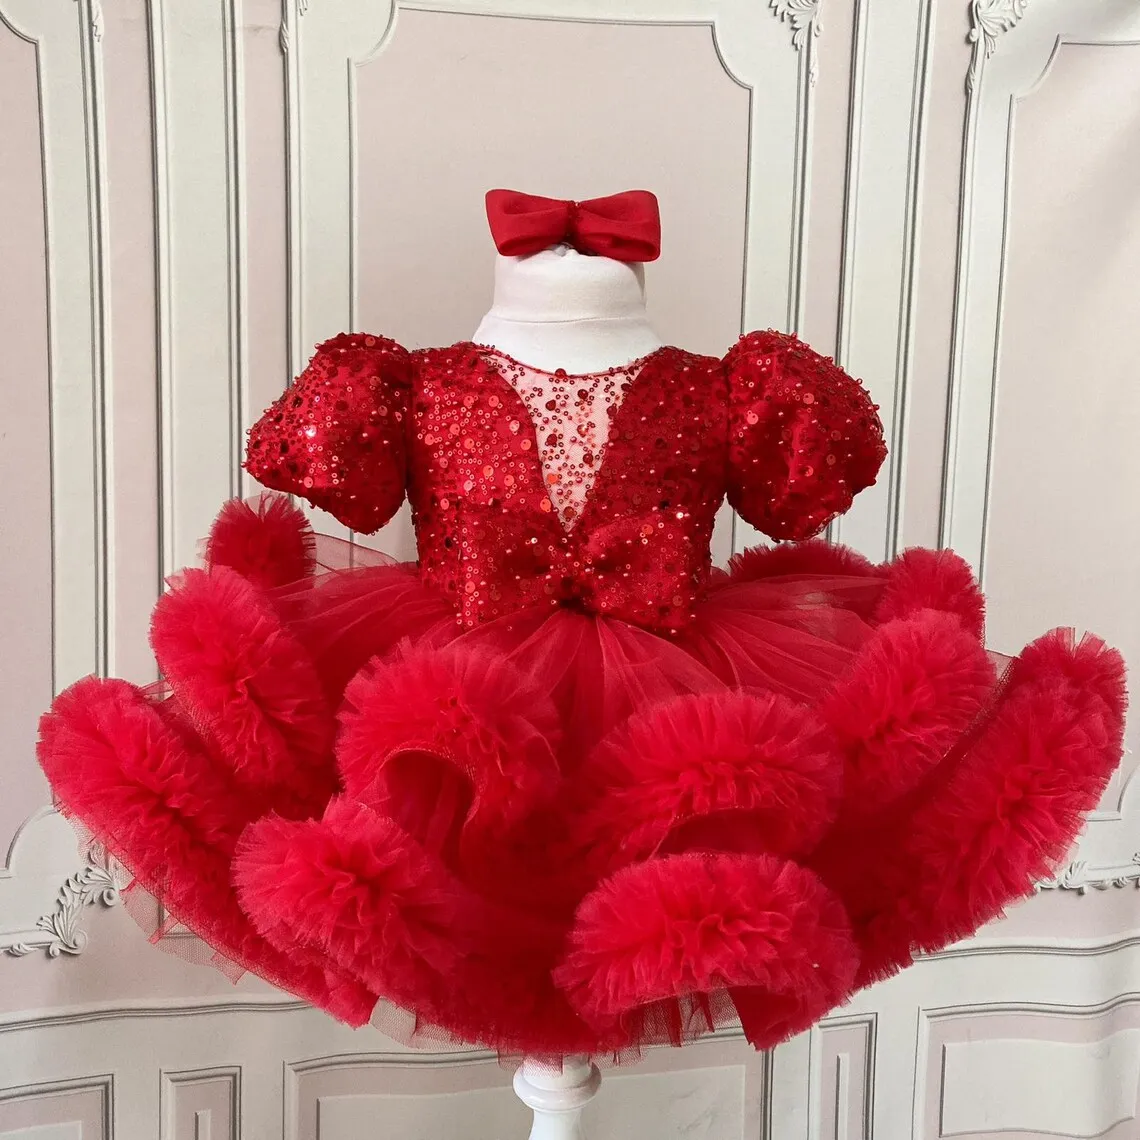 

Red Sequined Baby Girls Dresses Tulle Organza Fluffy Girl's Birthday Party Gown New Year Dress Photoshoot Size 6M 9M 12M 24M